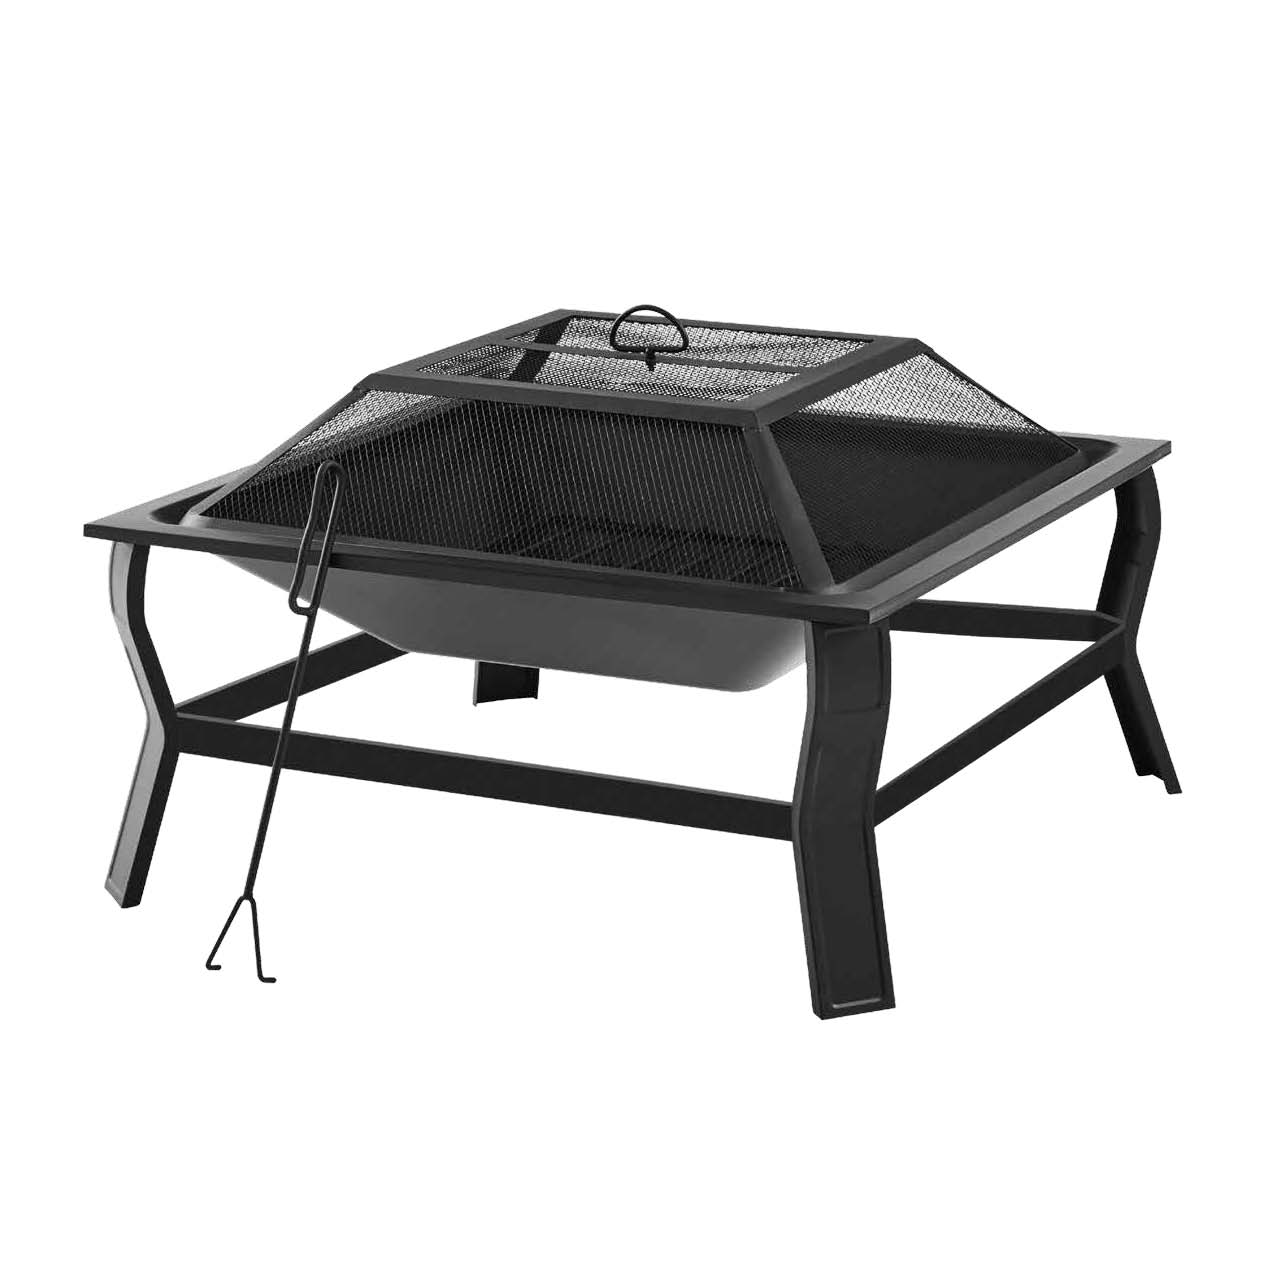 Mainstays Greyson 30” Square Wood Burning Fire Pit with Mesh Screen, Steel Fire Pit - image 2 of 9